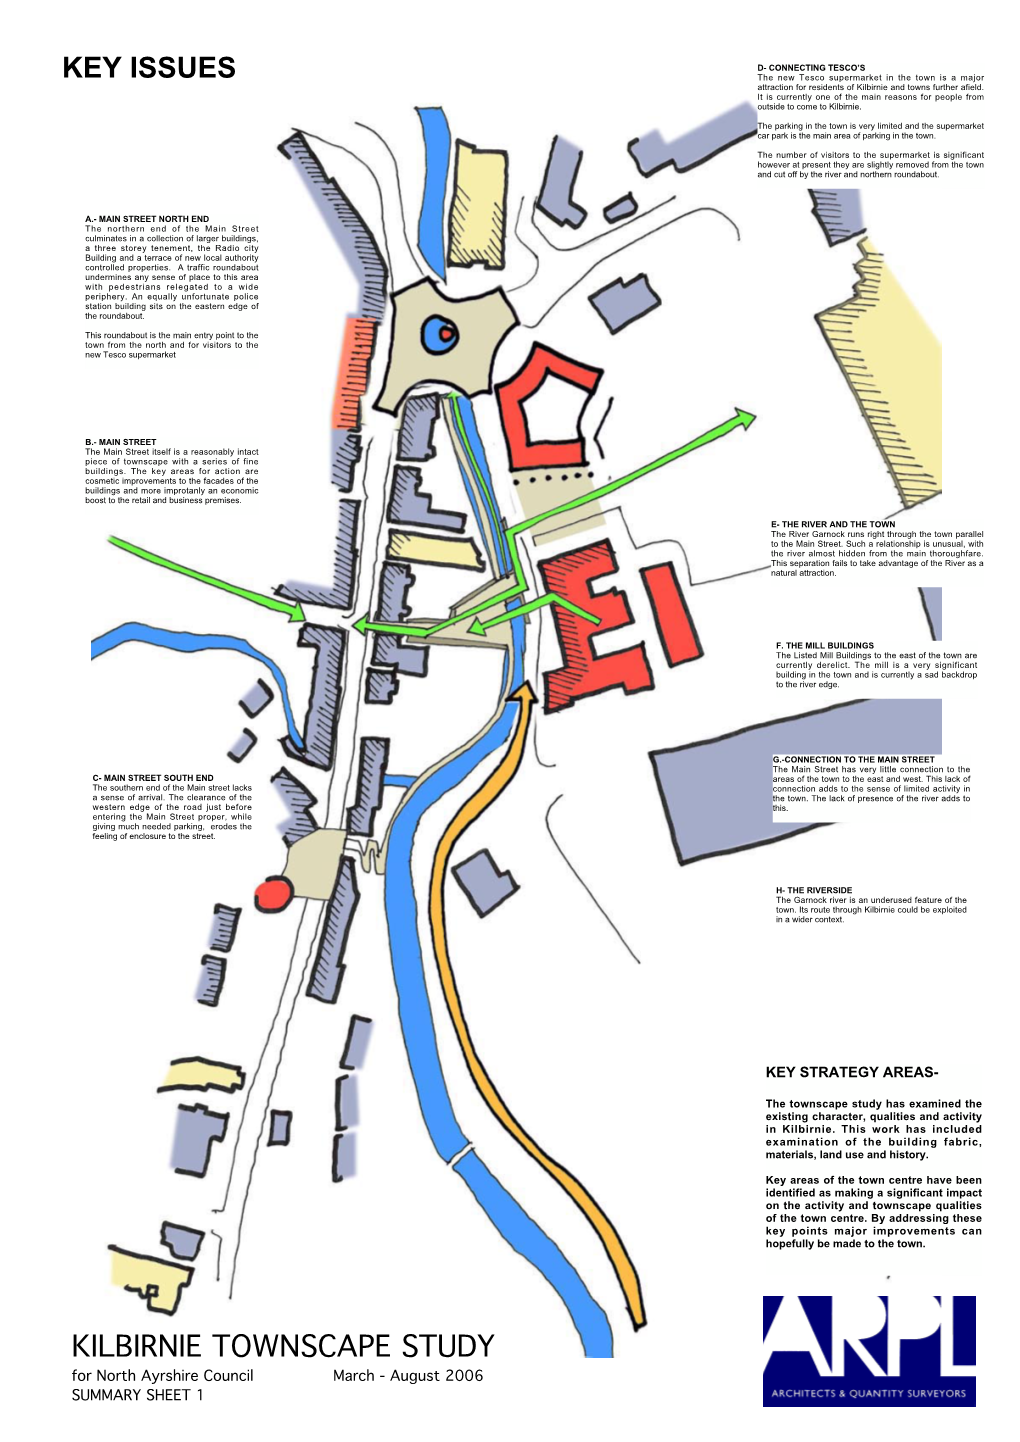 KILBIRNIE TOWNSCAPE STUDY for North Ayrshire Council March - August 2006 SUMMARY SHEET 1